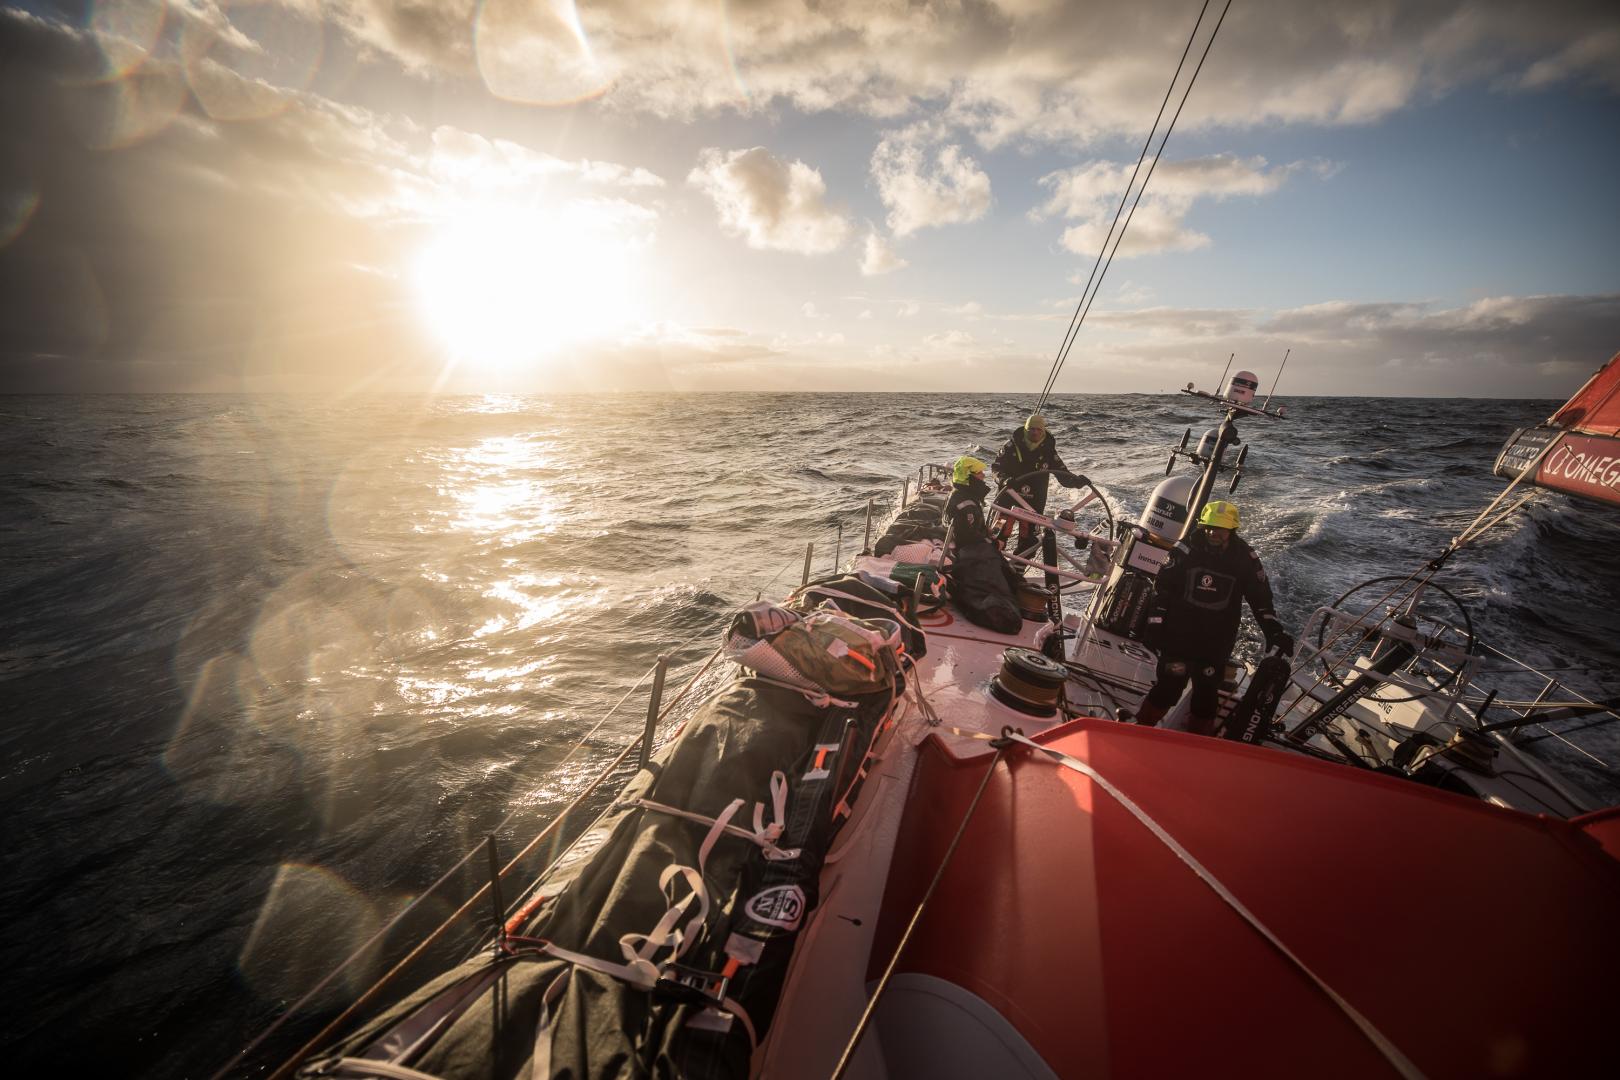 Volvo Ocean Race Leg 3, Cape Town to Melbourne, day 11, on board Dongfeng